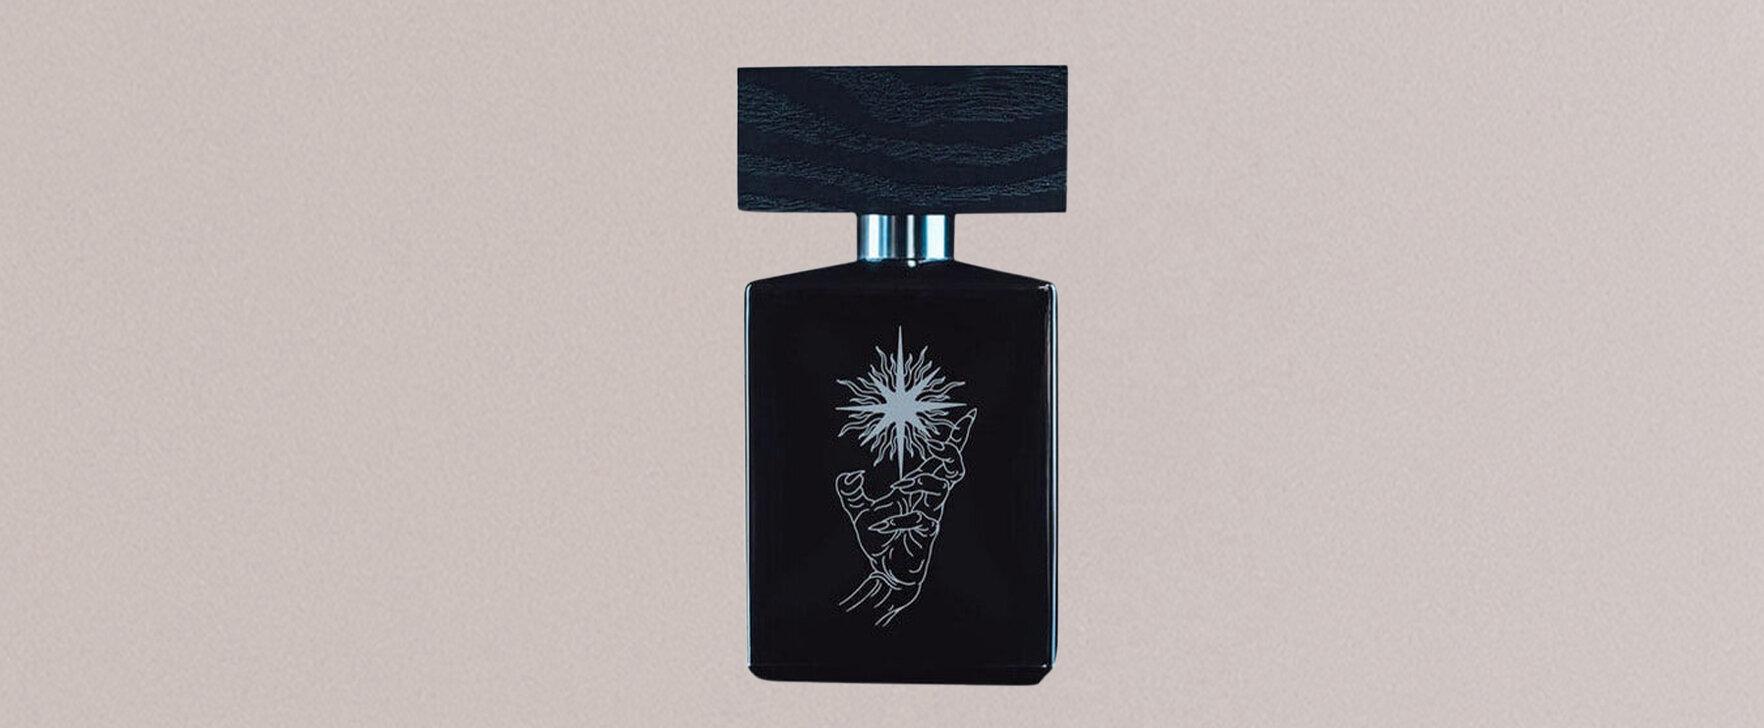 The New Unisex Fragrance Absent Presence by Beaufort - Inspired by Poetry